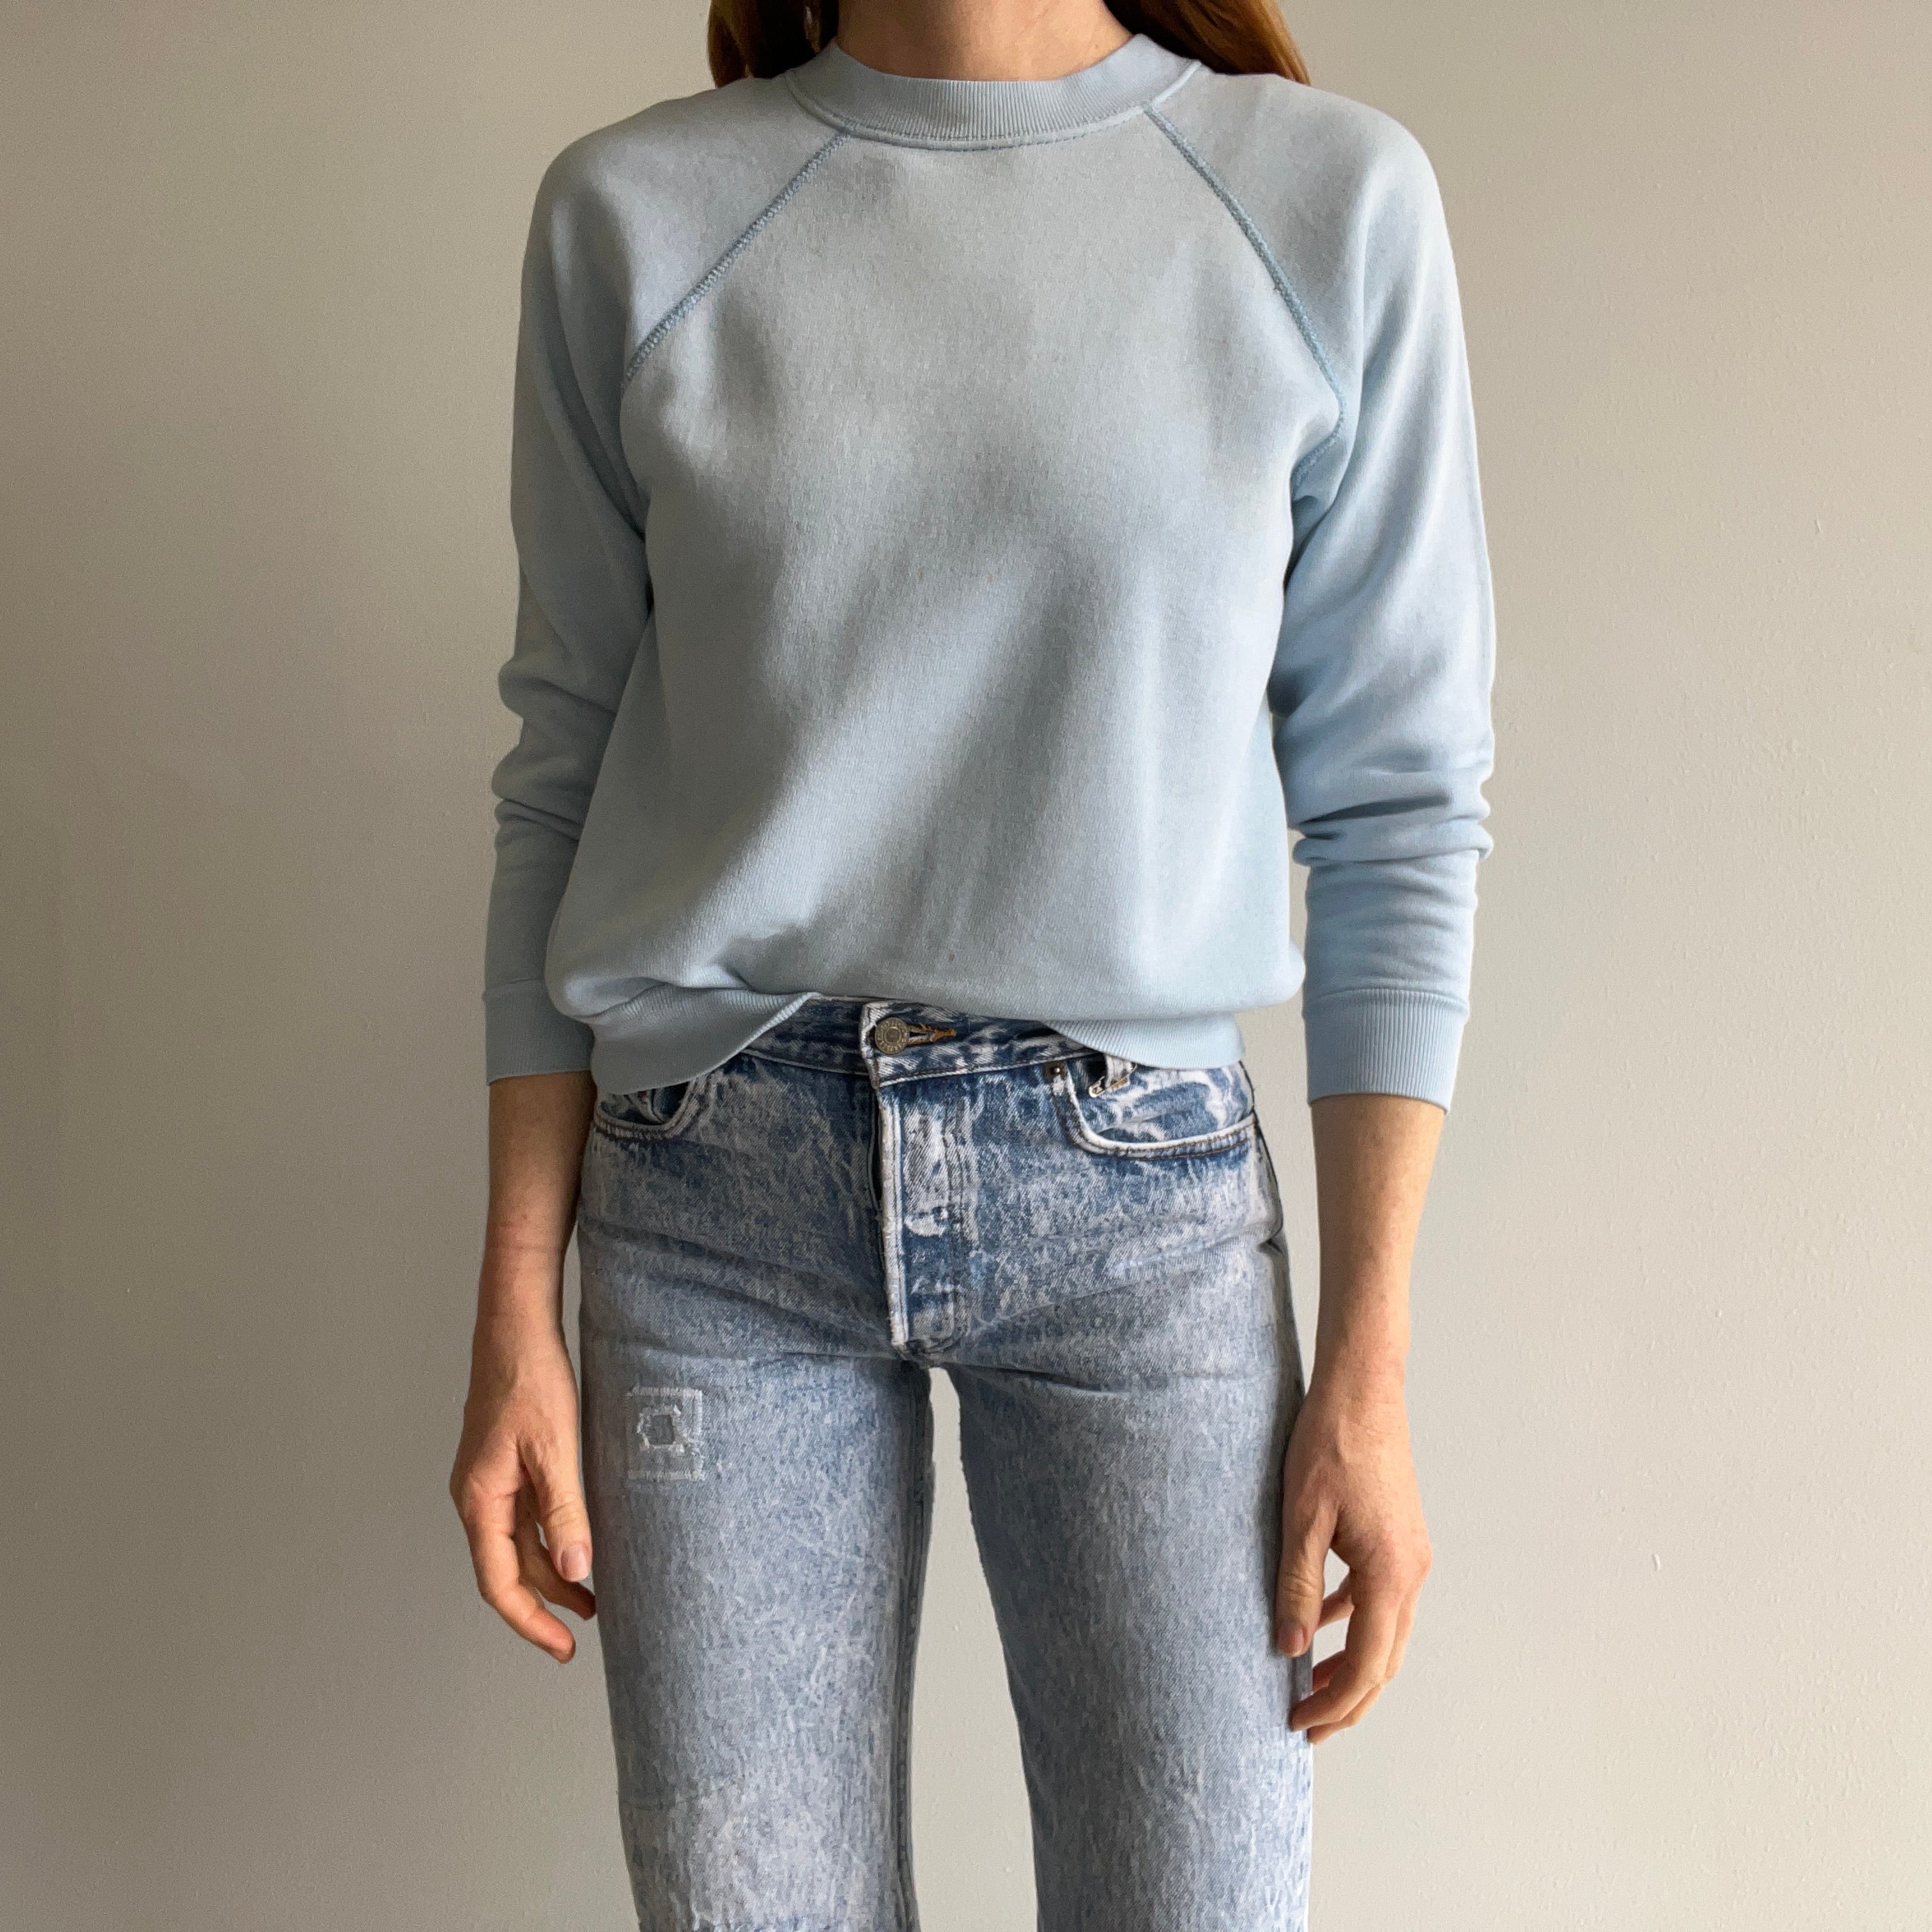 1980s Perfectly Stained and Worn Sky Blue Smaller Raglan Sweatshirt